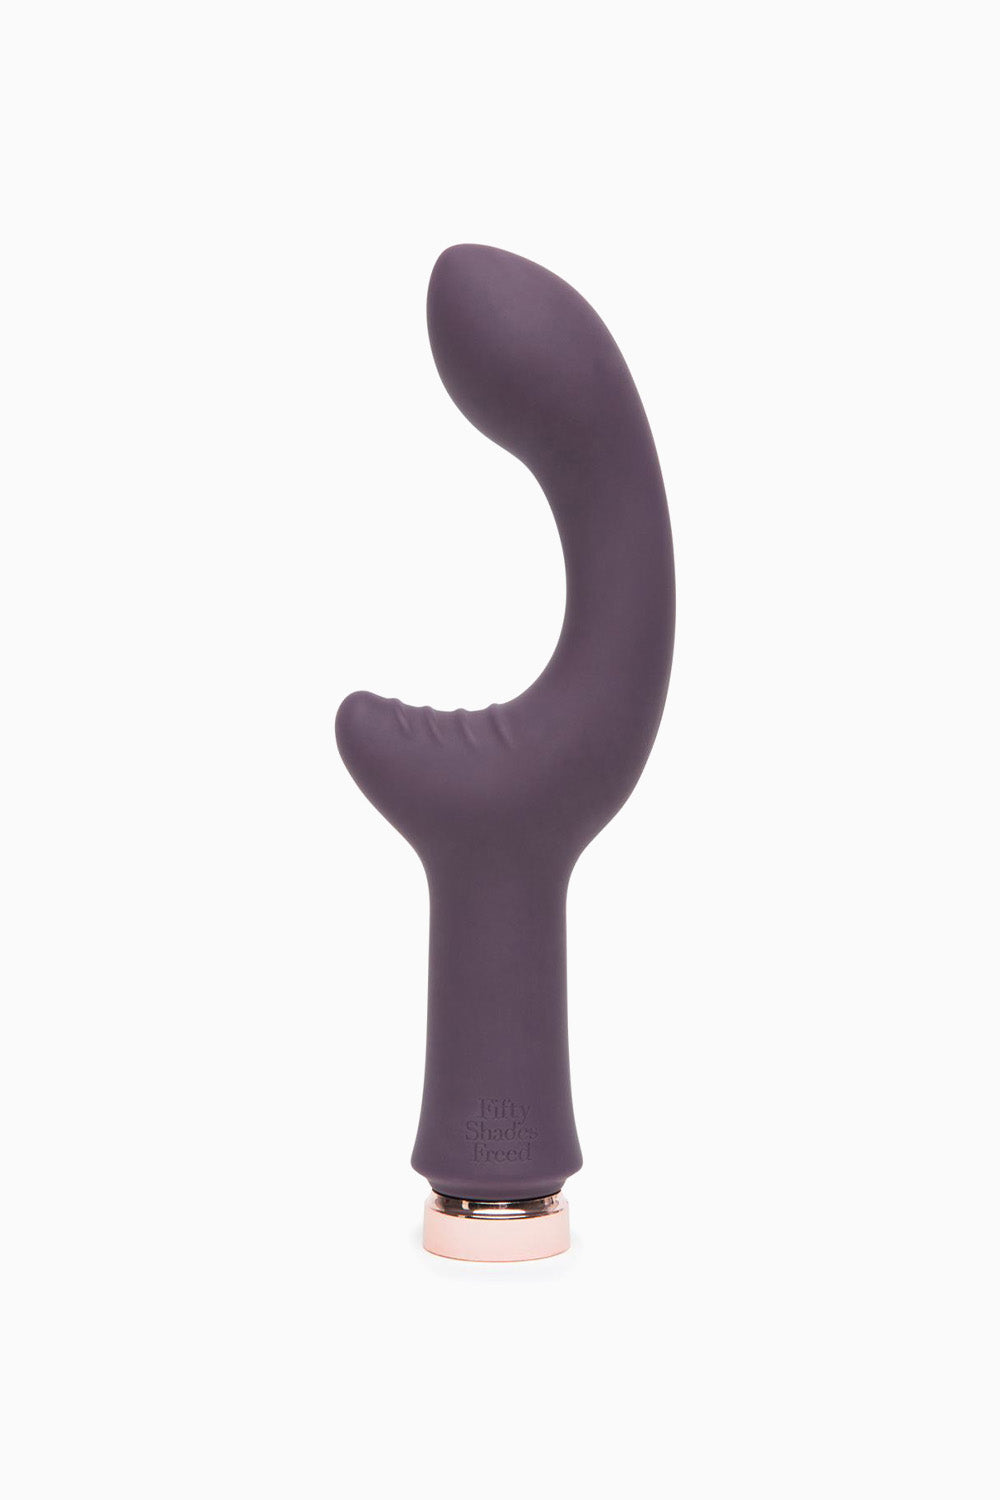 Fifty Shades Freed Lavish Attention Rechargeable Clitoral & G-Spot Vibrator, 7.5 Inches